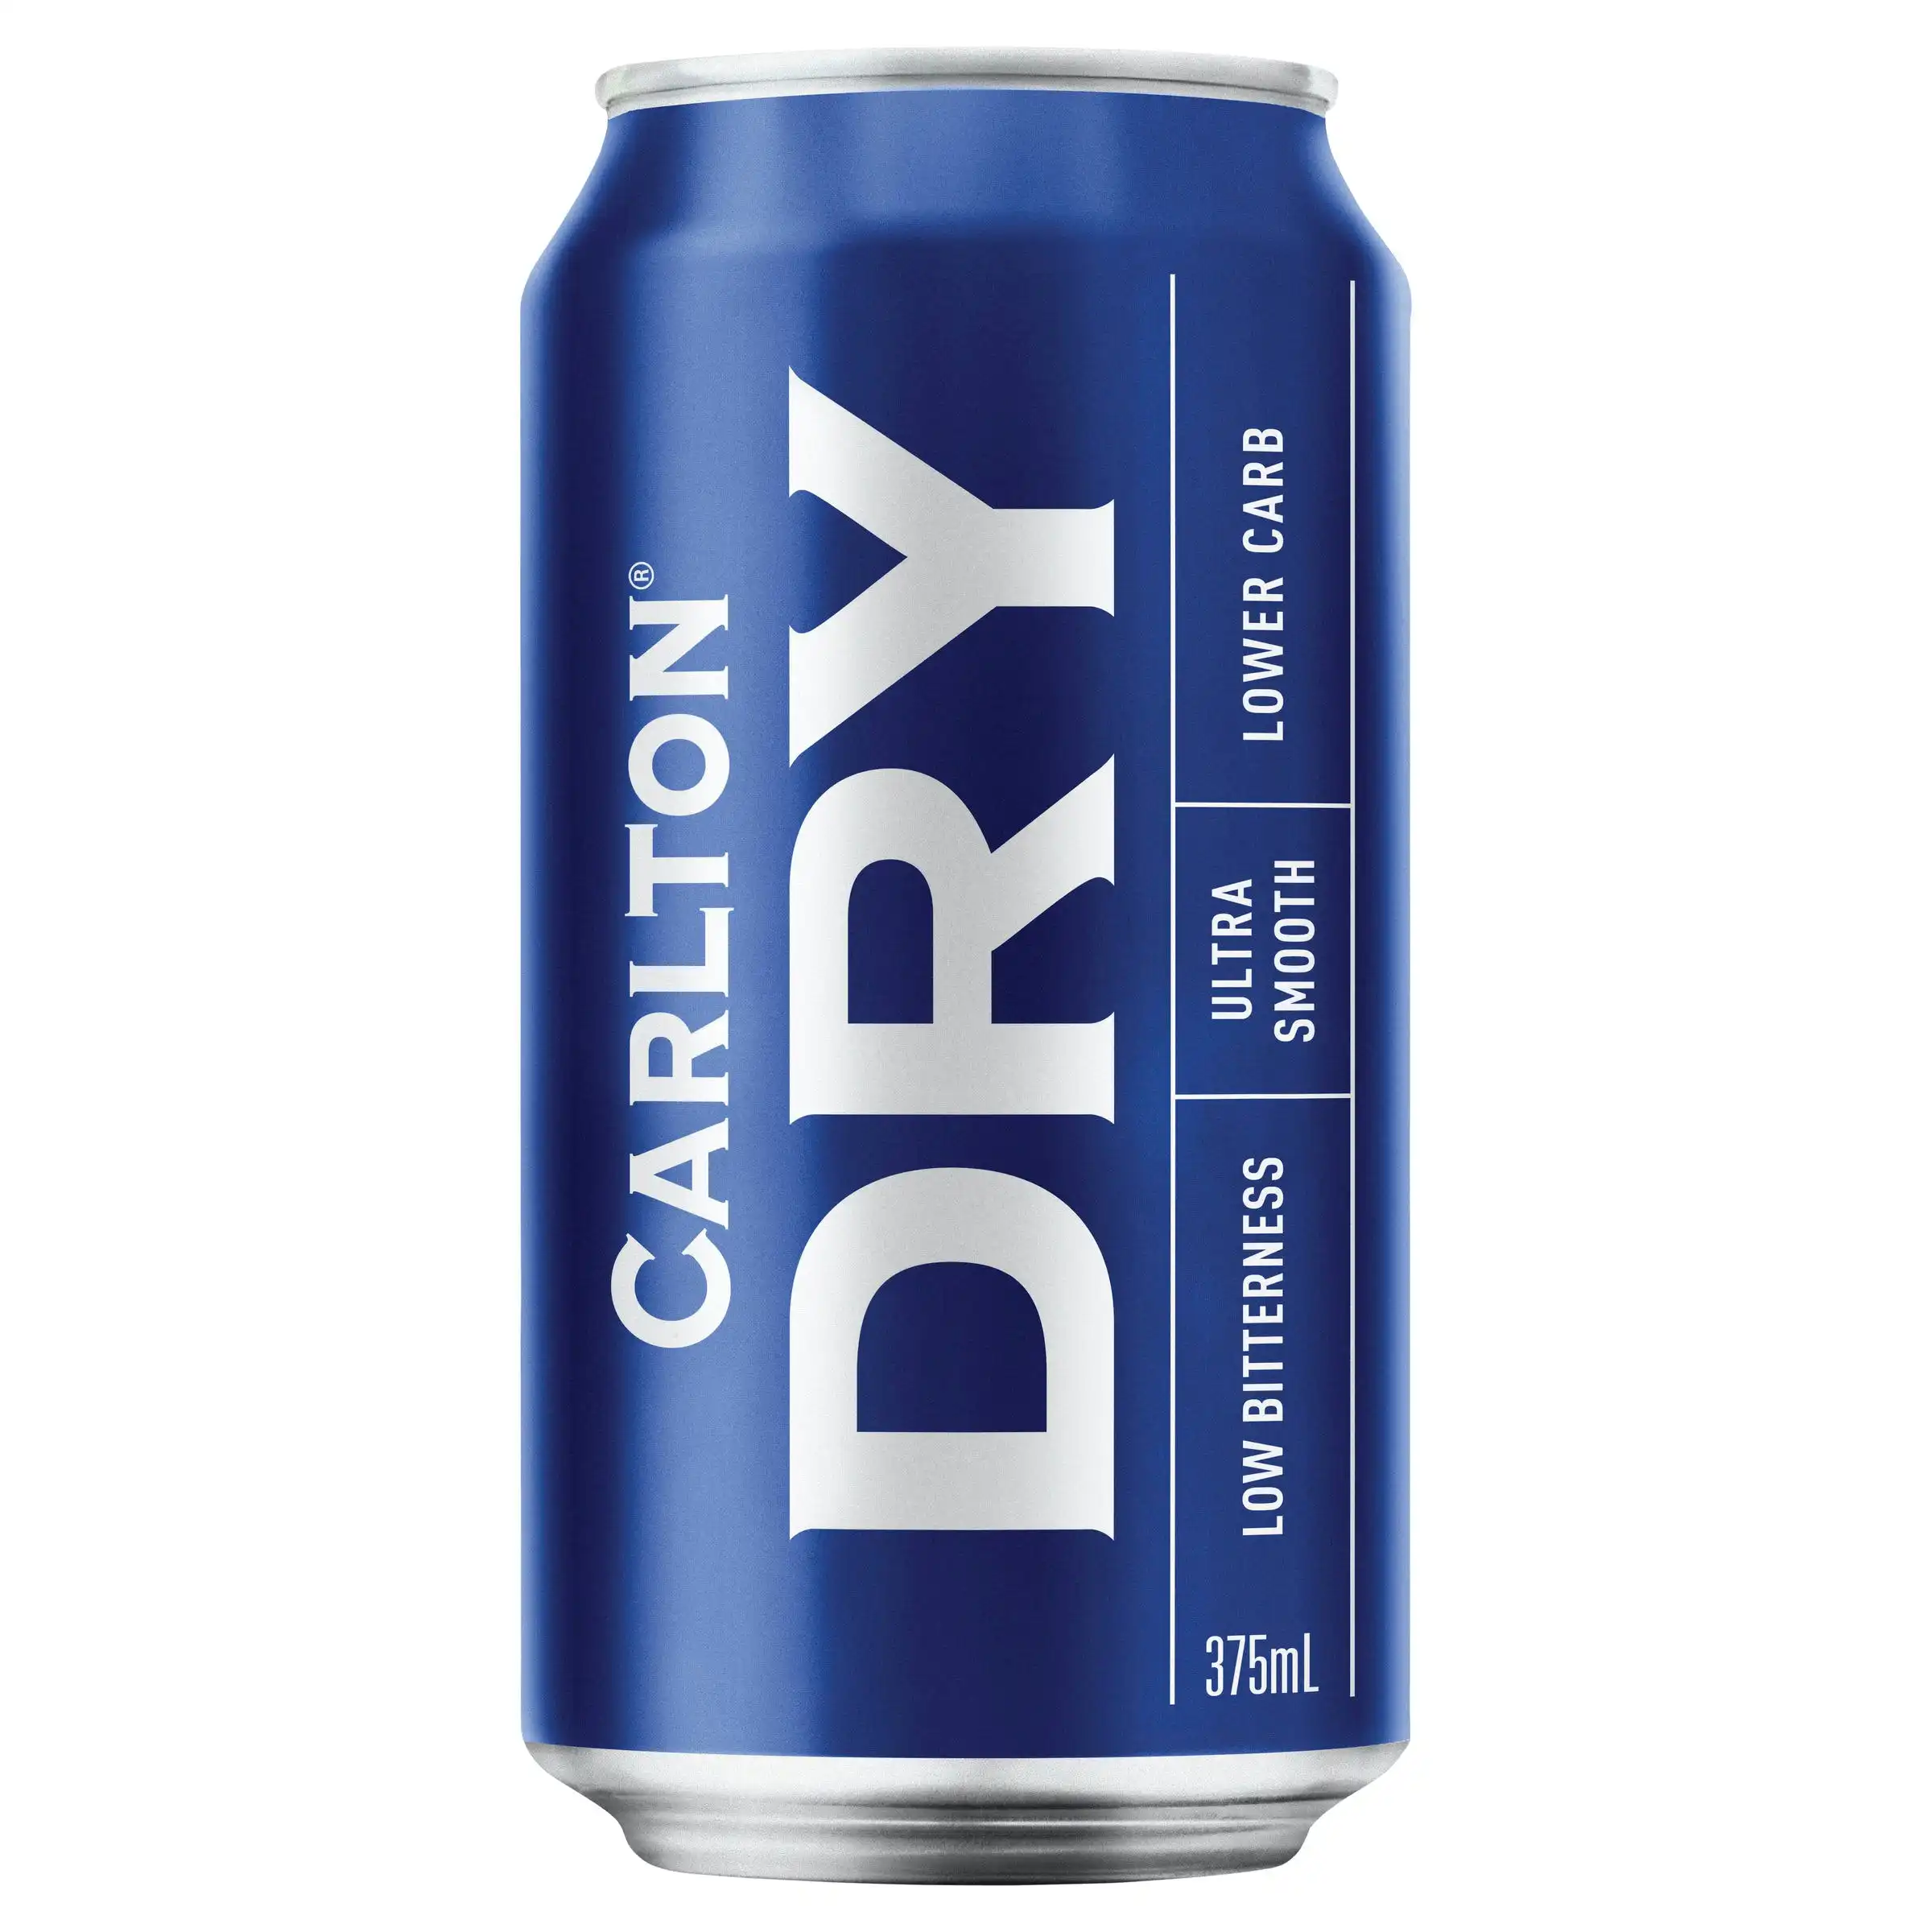 Carlton Dry Beer 48 x 375mL Cans